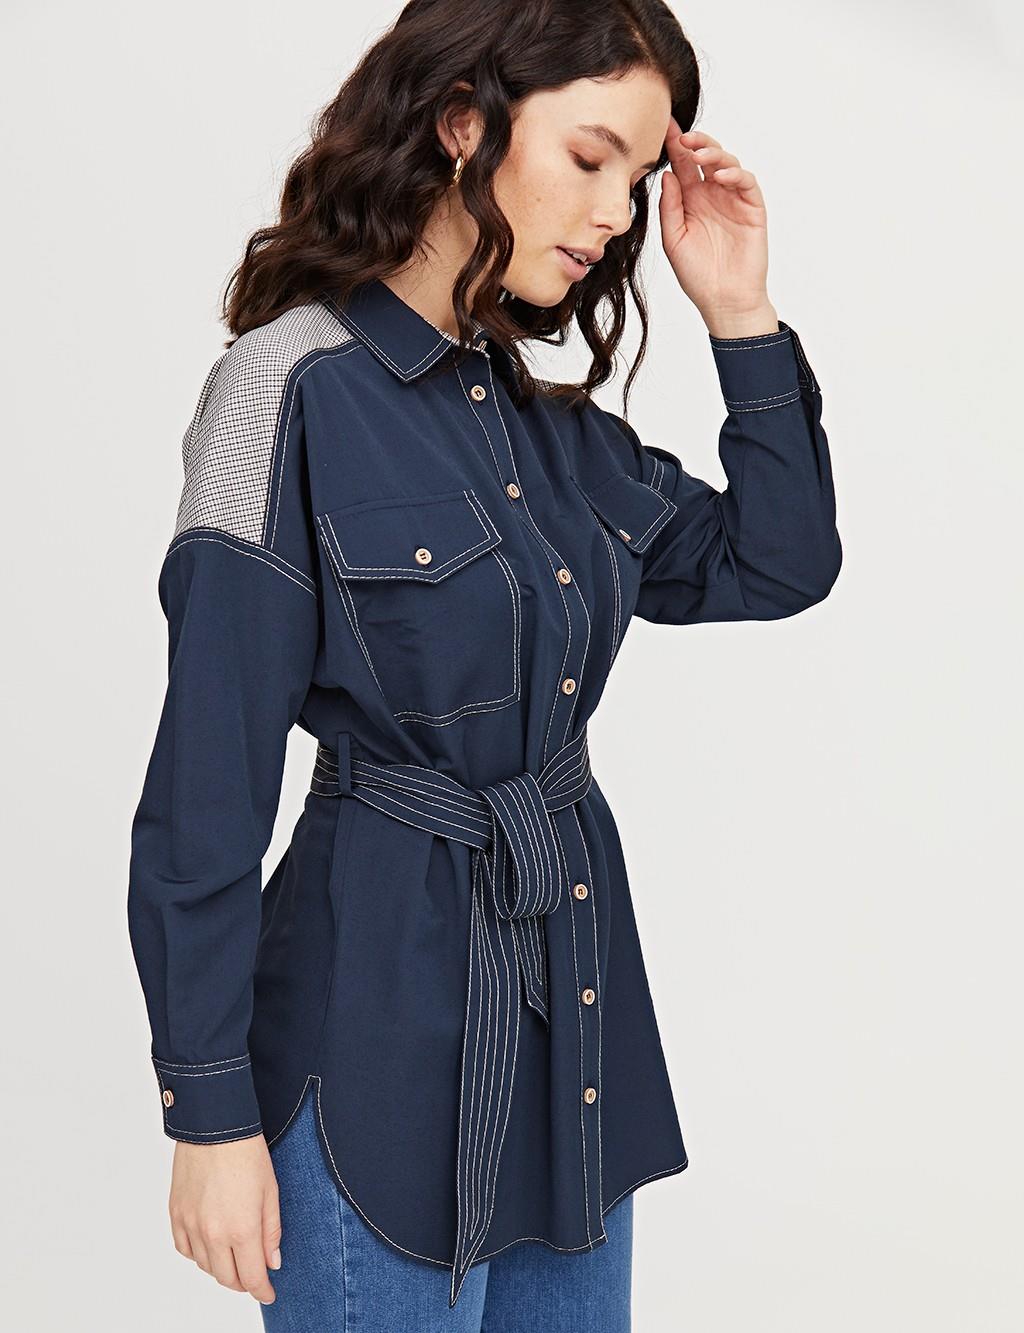 Belted Tunic With Double Pocket B21 21297 Navy